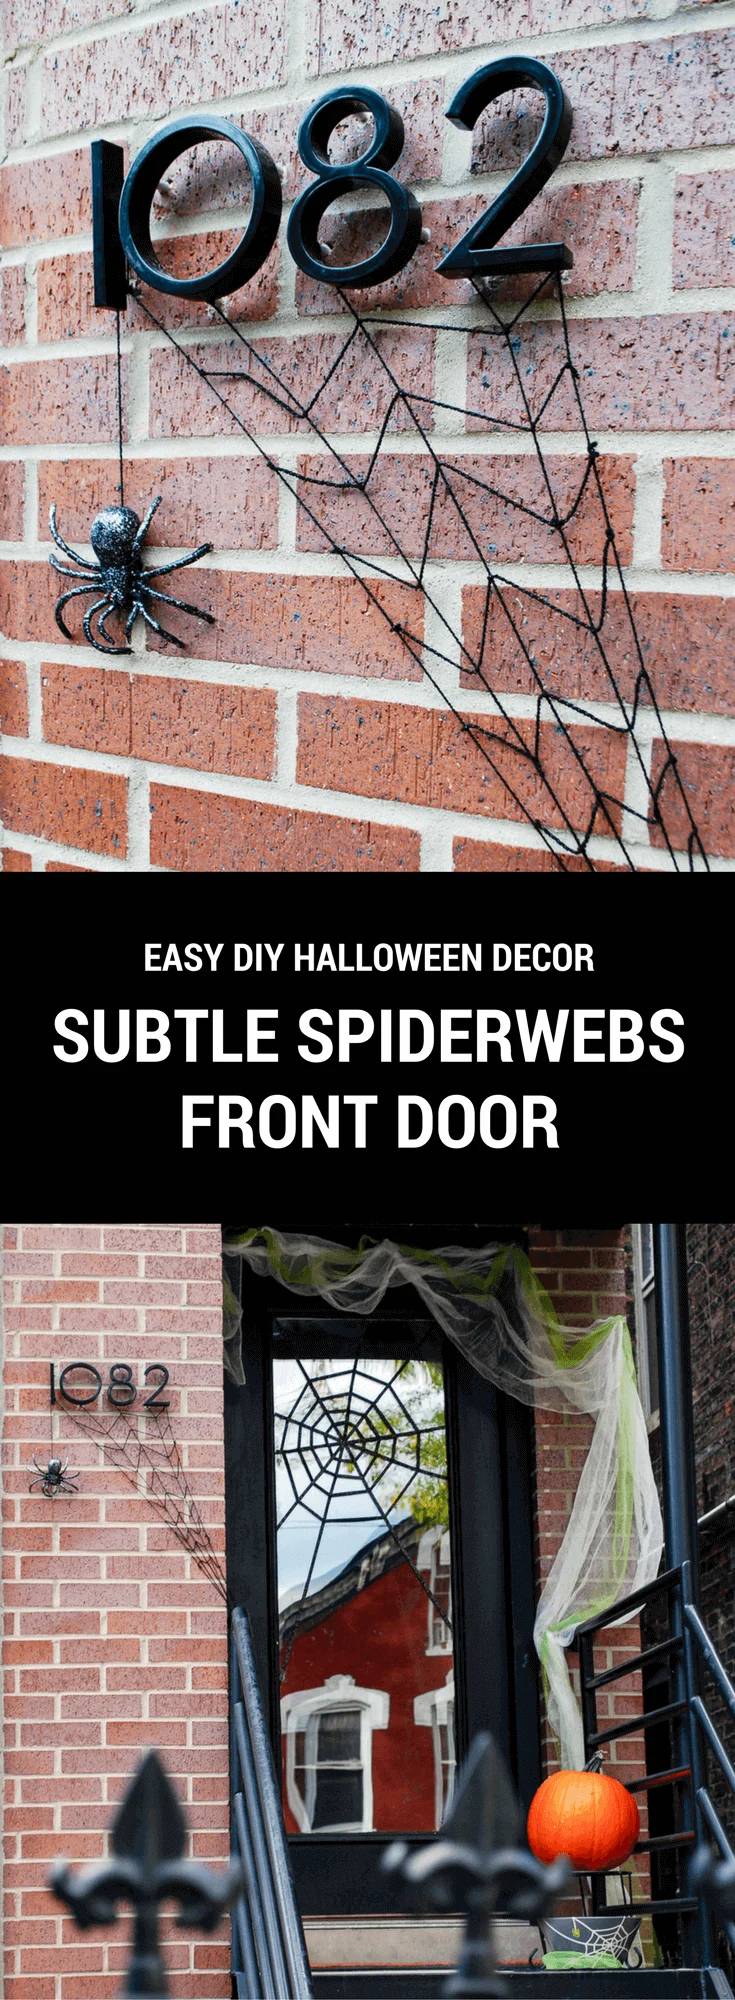 Subtle spiderwebs easy DIY Halloween front door decoration. Use yarn, glitter tape, cheesecloth and a plastic spider to lure in trick-or-treaters ...eek! #halloween #spon #spookyspaces